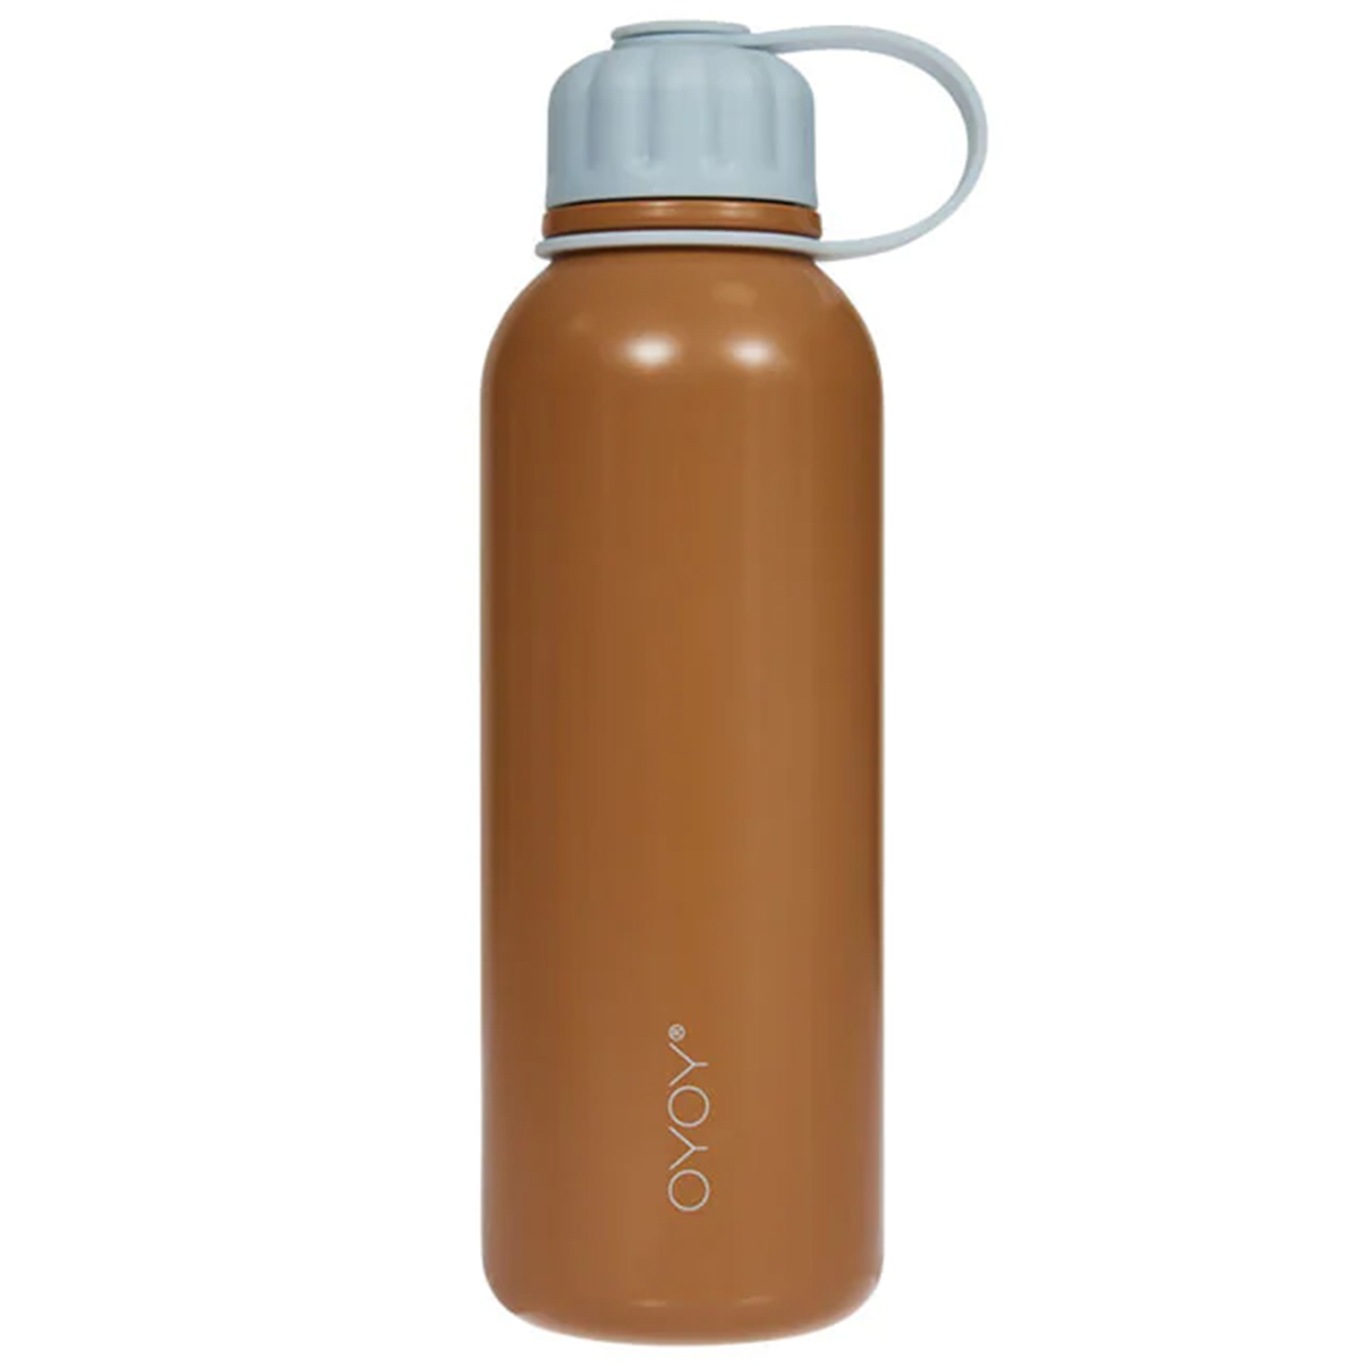 Pullo Thermosflasche, Karamell/Icy Blue